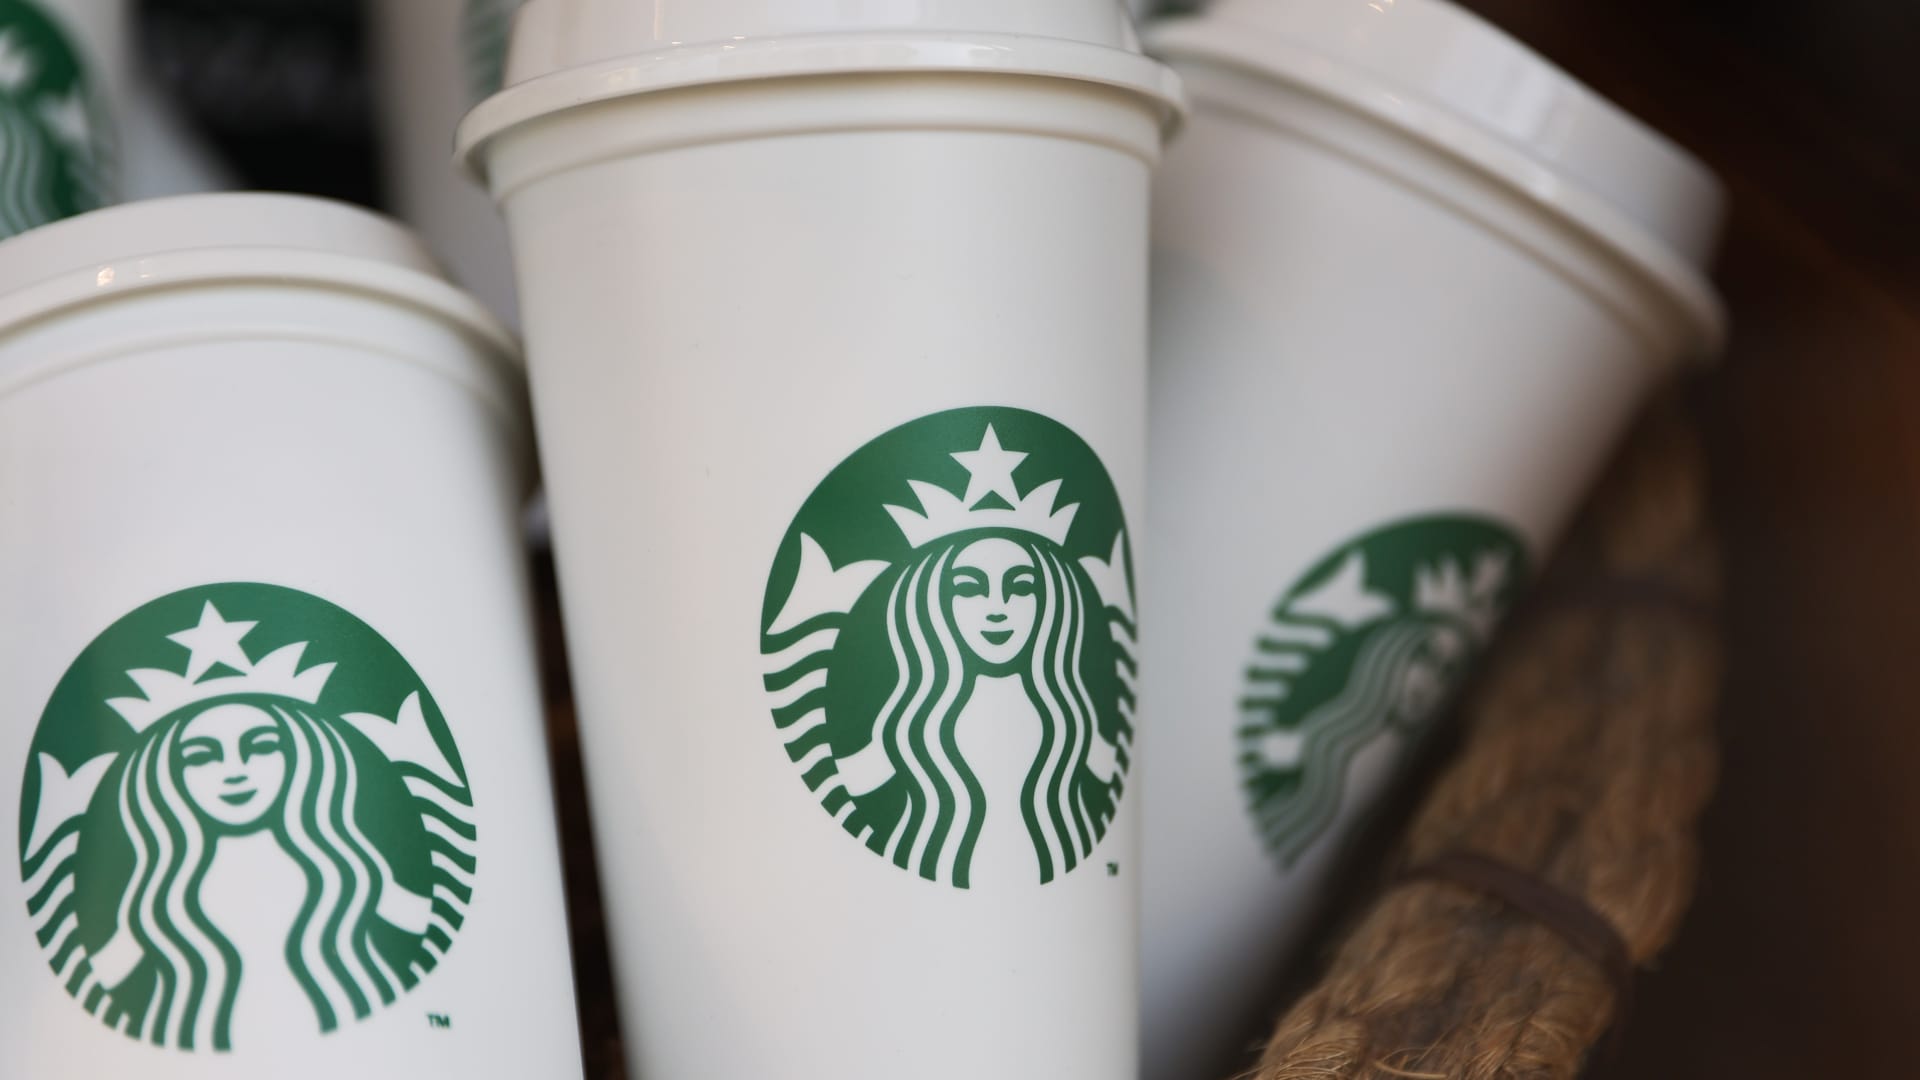 Starbucks is about to report earnings. Here’s what to expect